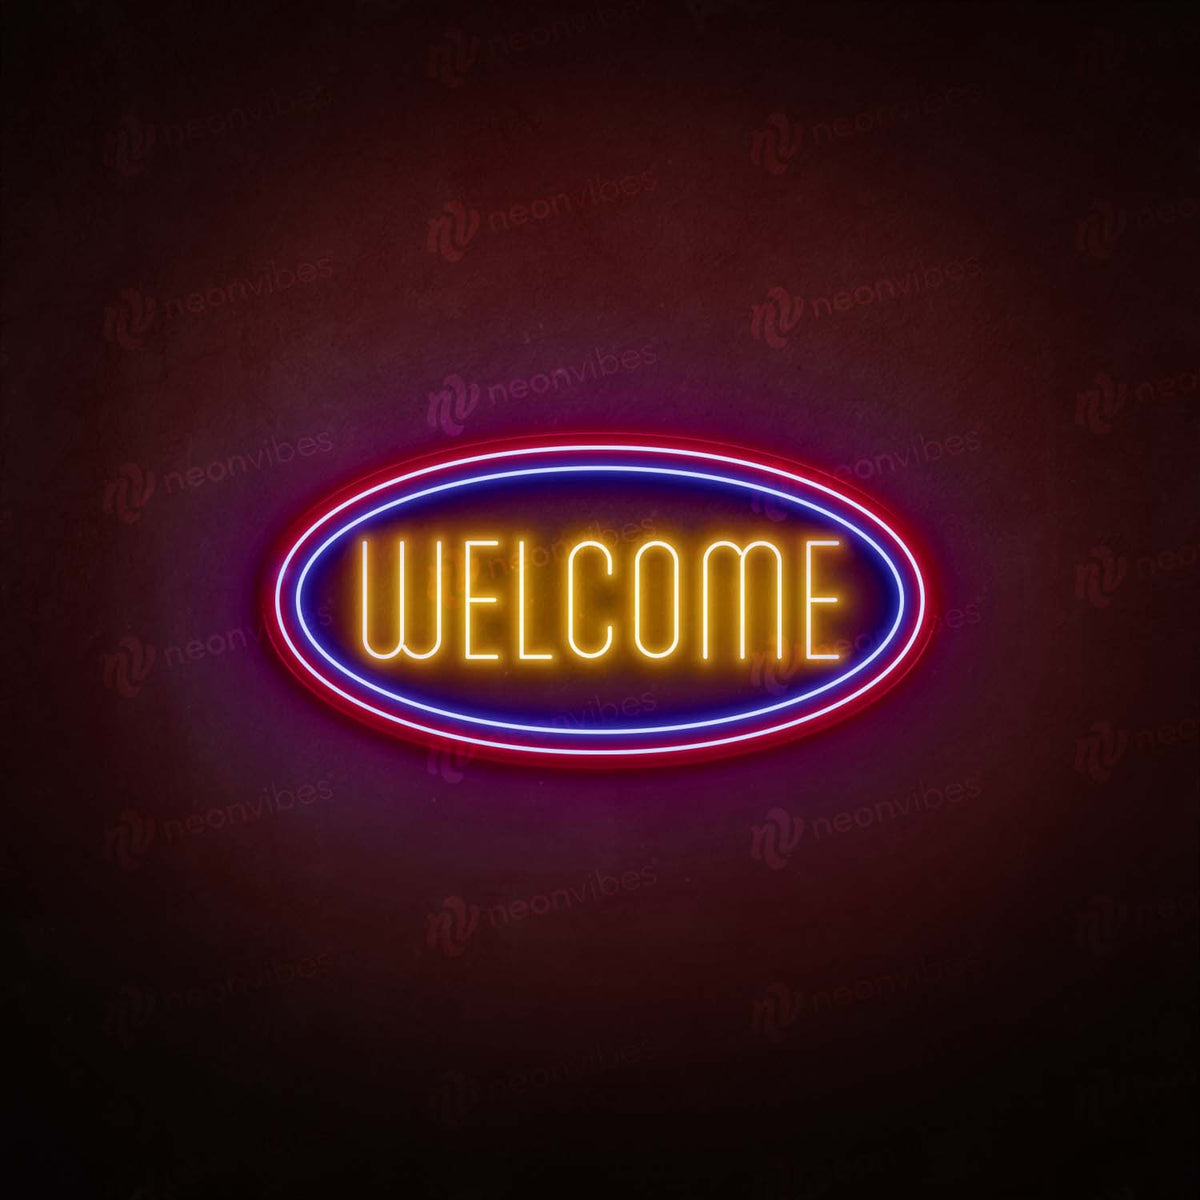 Welcome neon sign